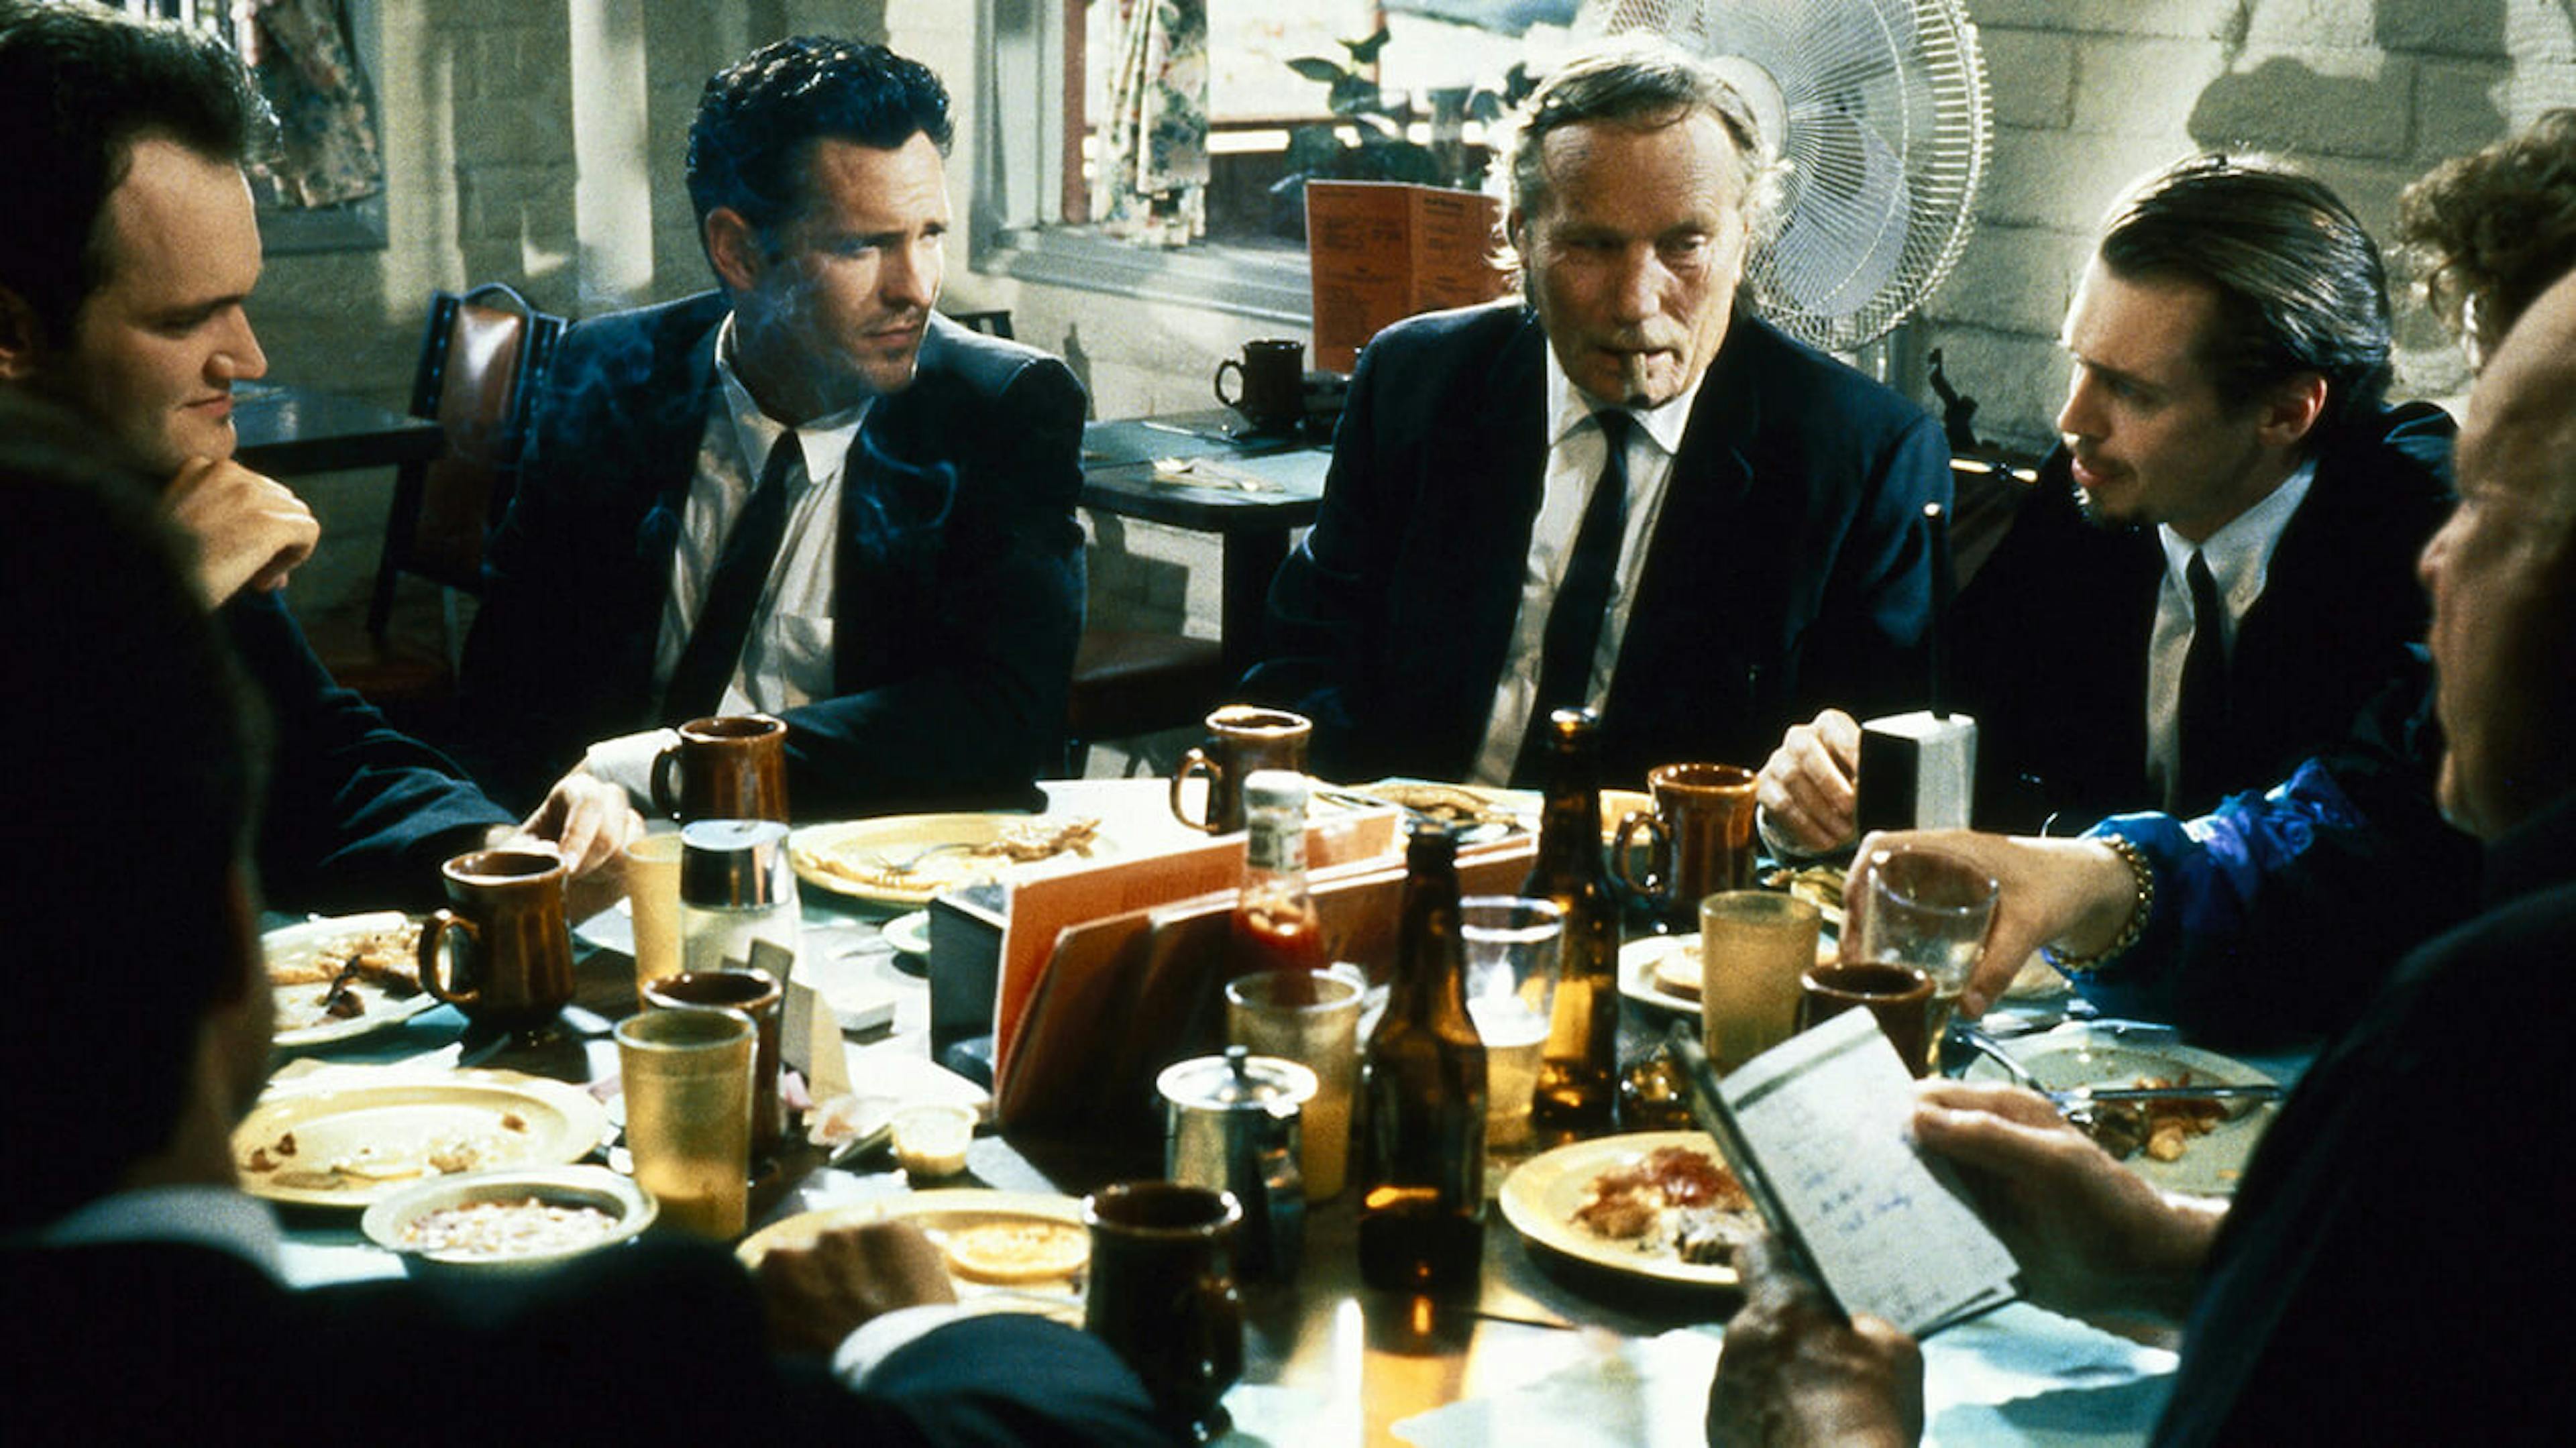 Still from the movie Reservoir Dogs